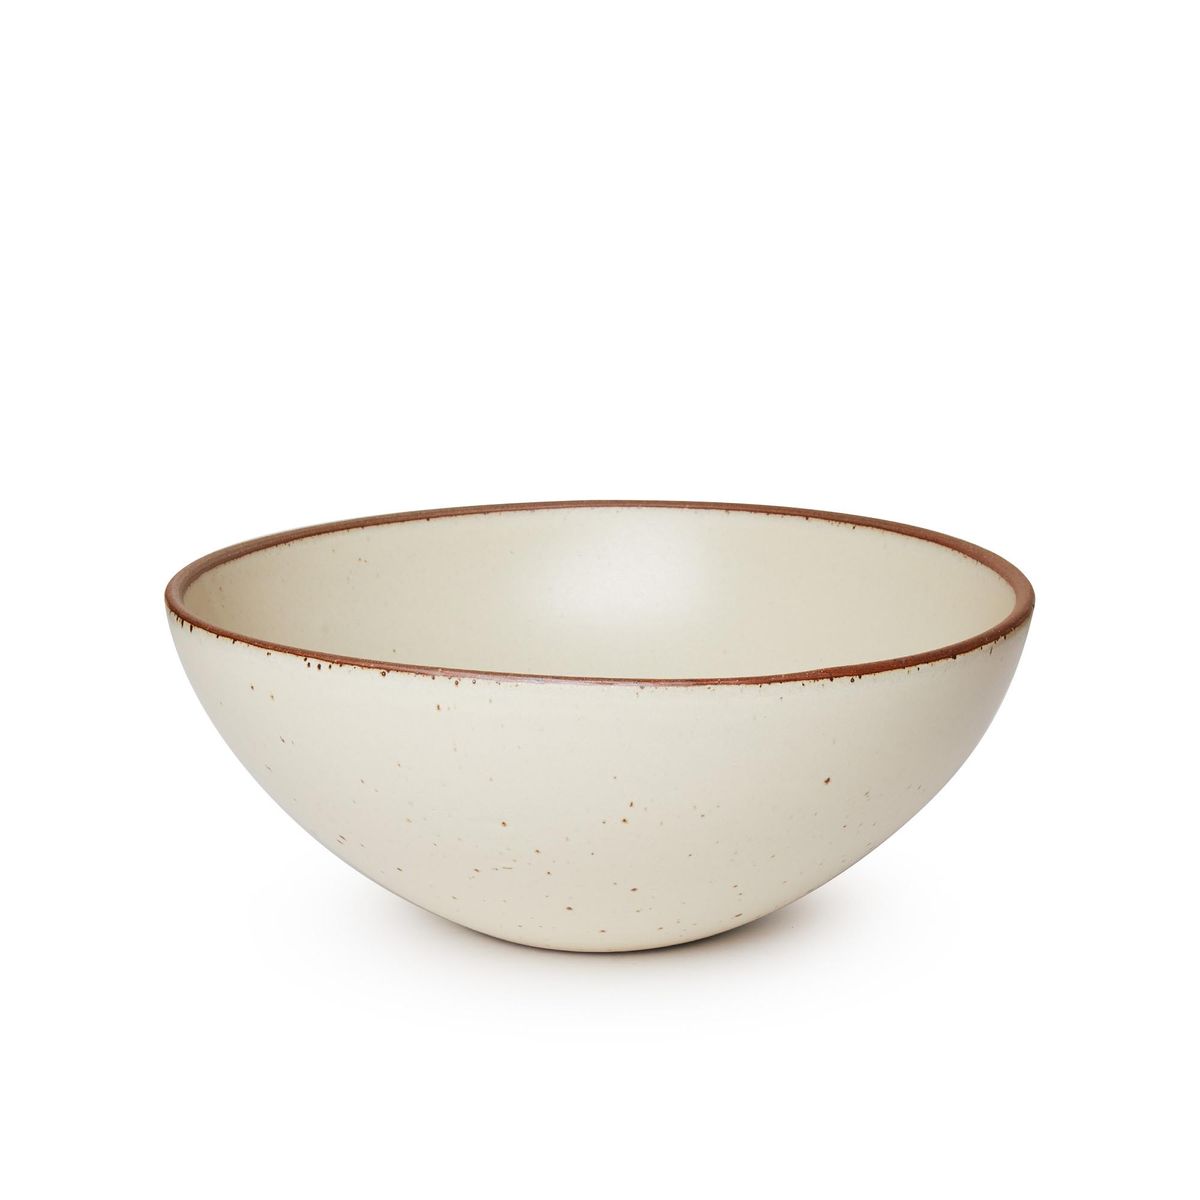 A large ceramic mixing bowl in a warm, tan-toned, off-white color featuring iron speckles and an unglazed rim